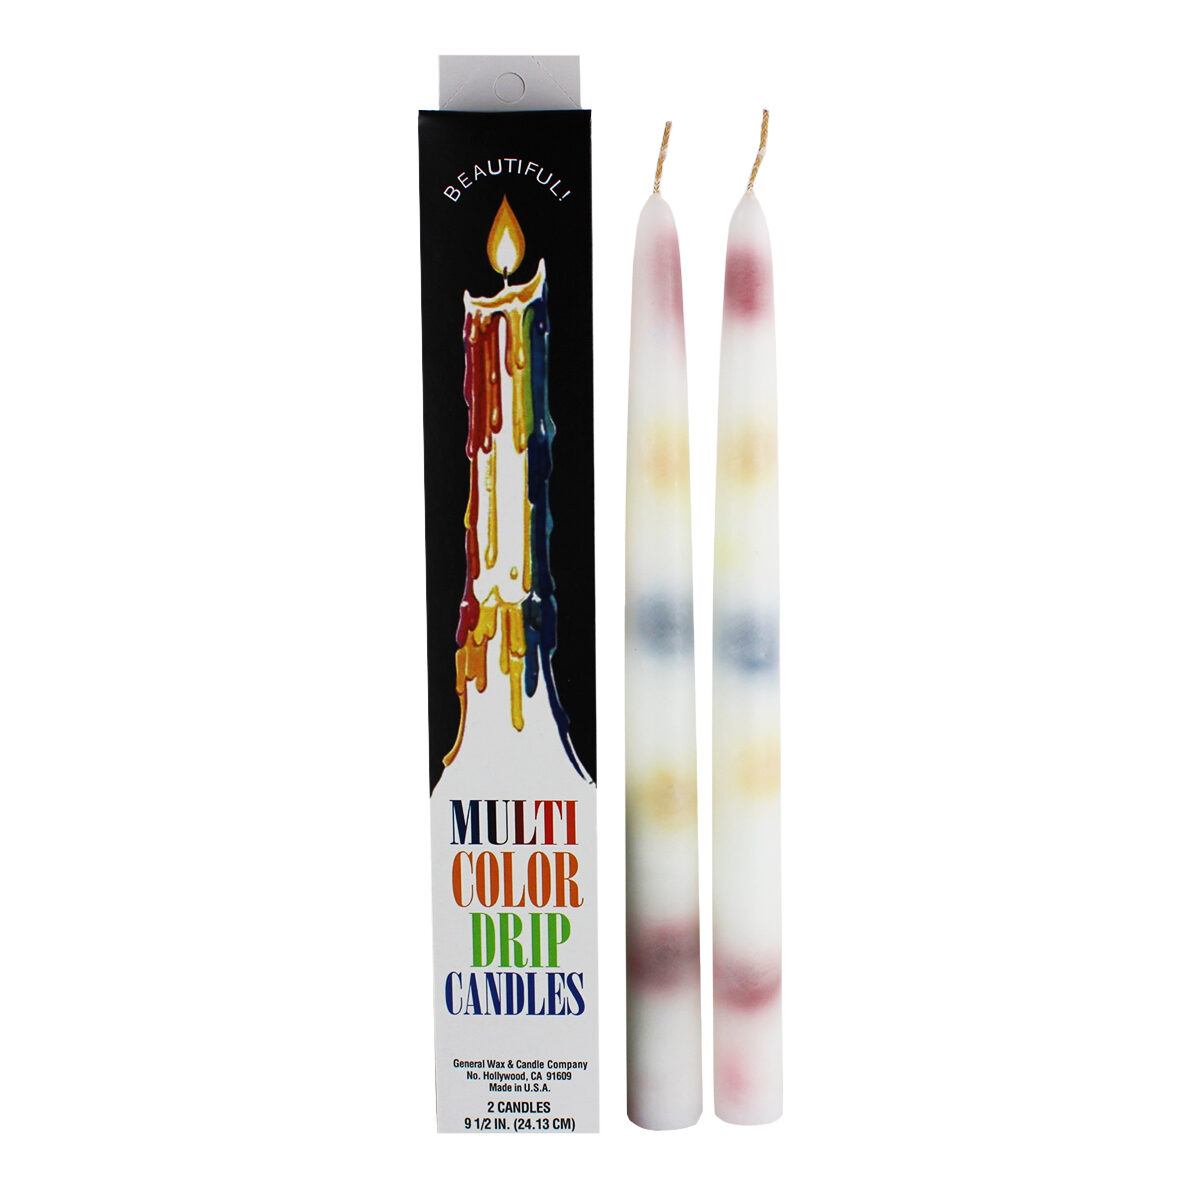 12  Multi-Color TAPER DRIP CANDLES 3/4" x 9 1/2" long 6  packs of 2 candles 